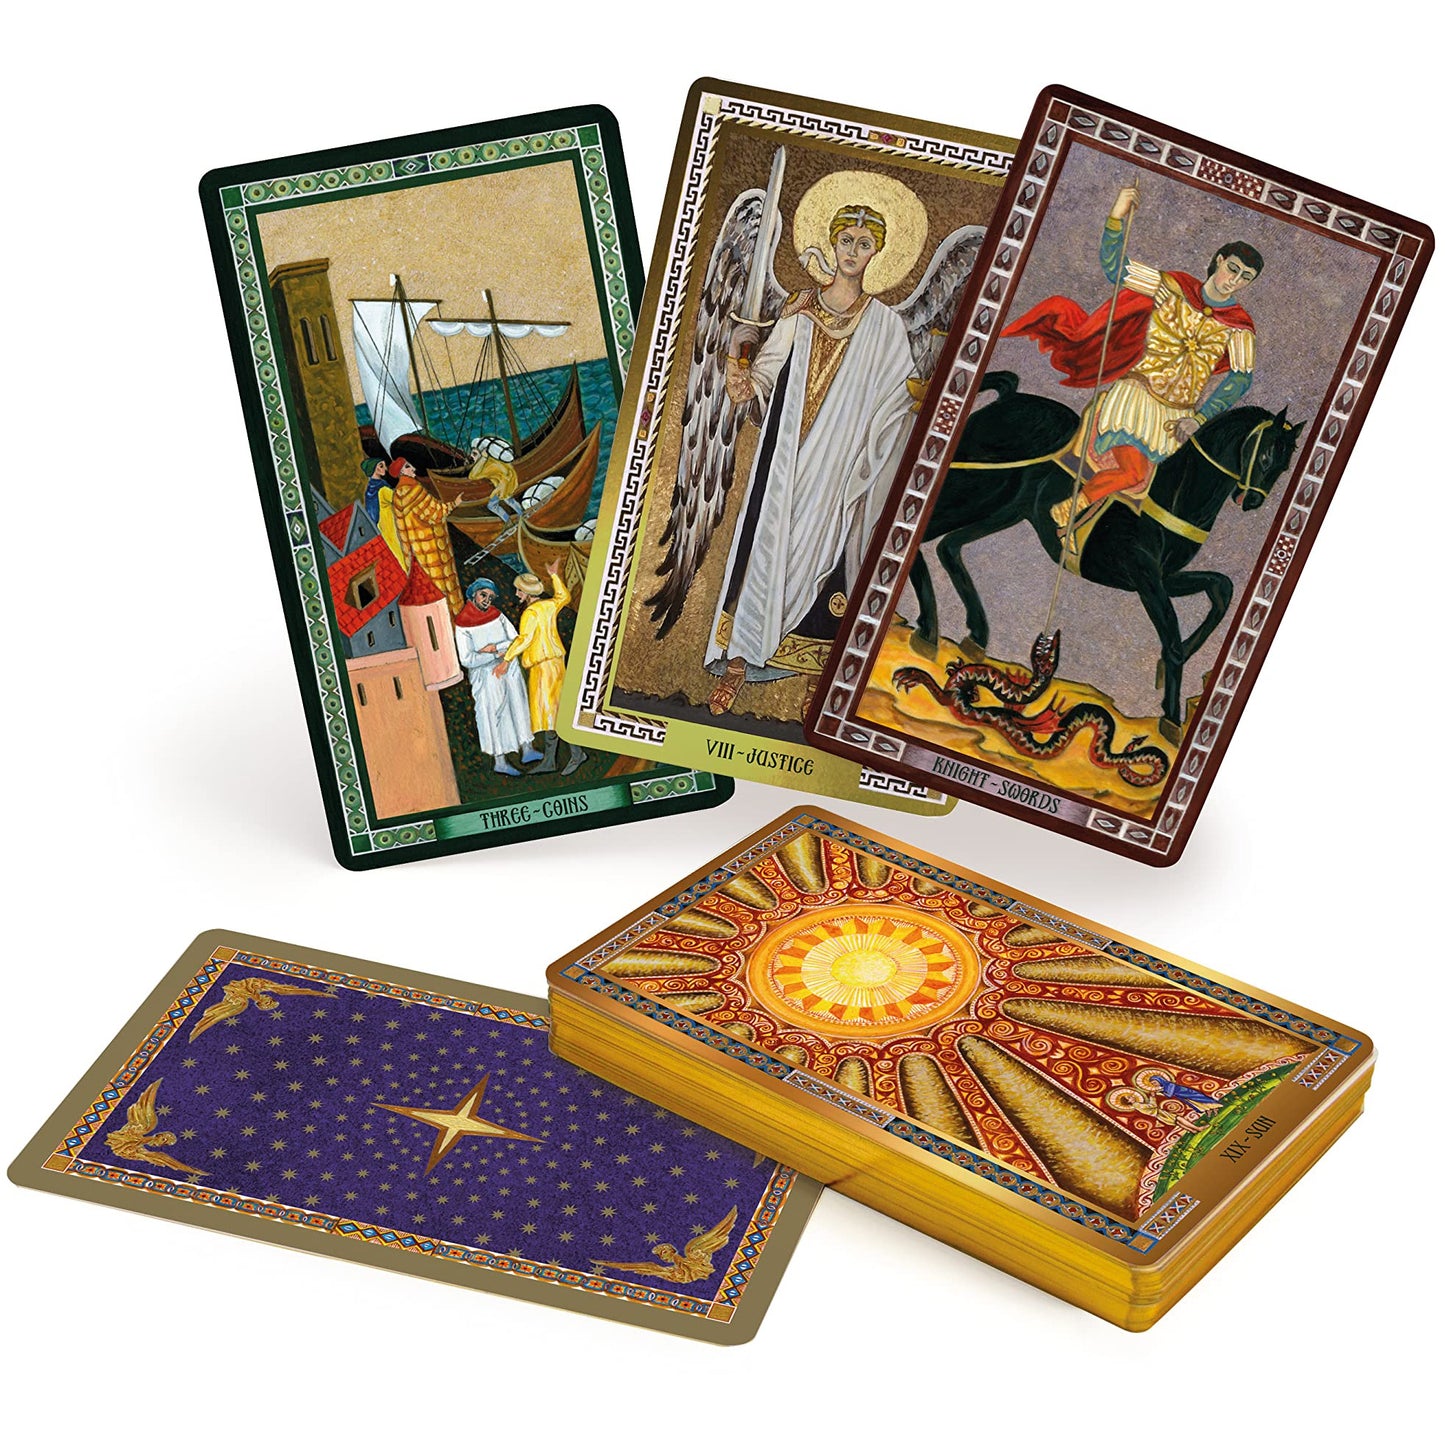 The Byzantine Tarot Cards: Wisdom from an Ancient Empire